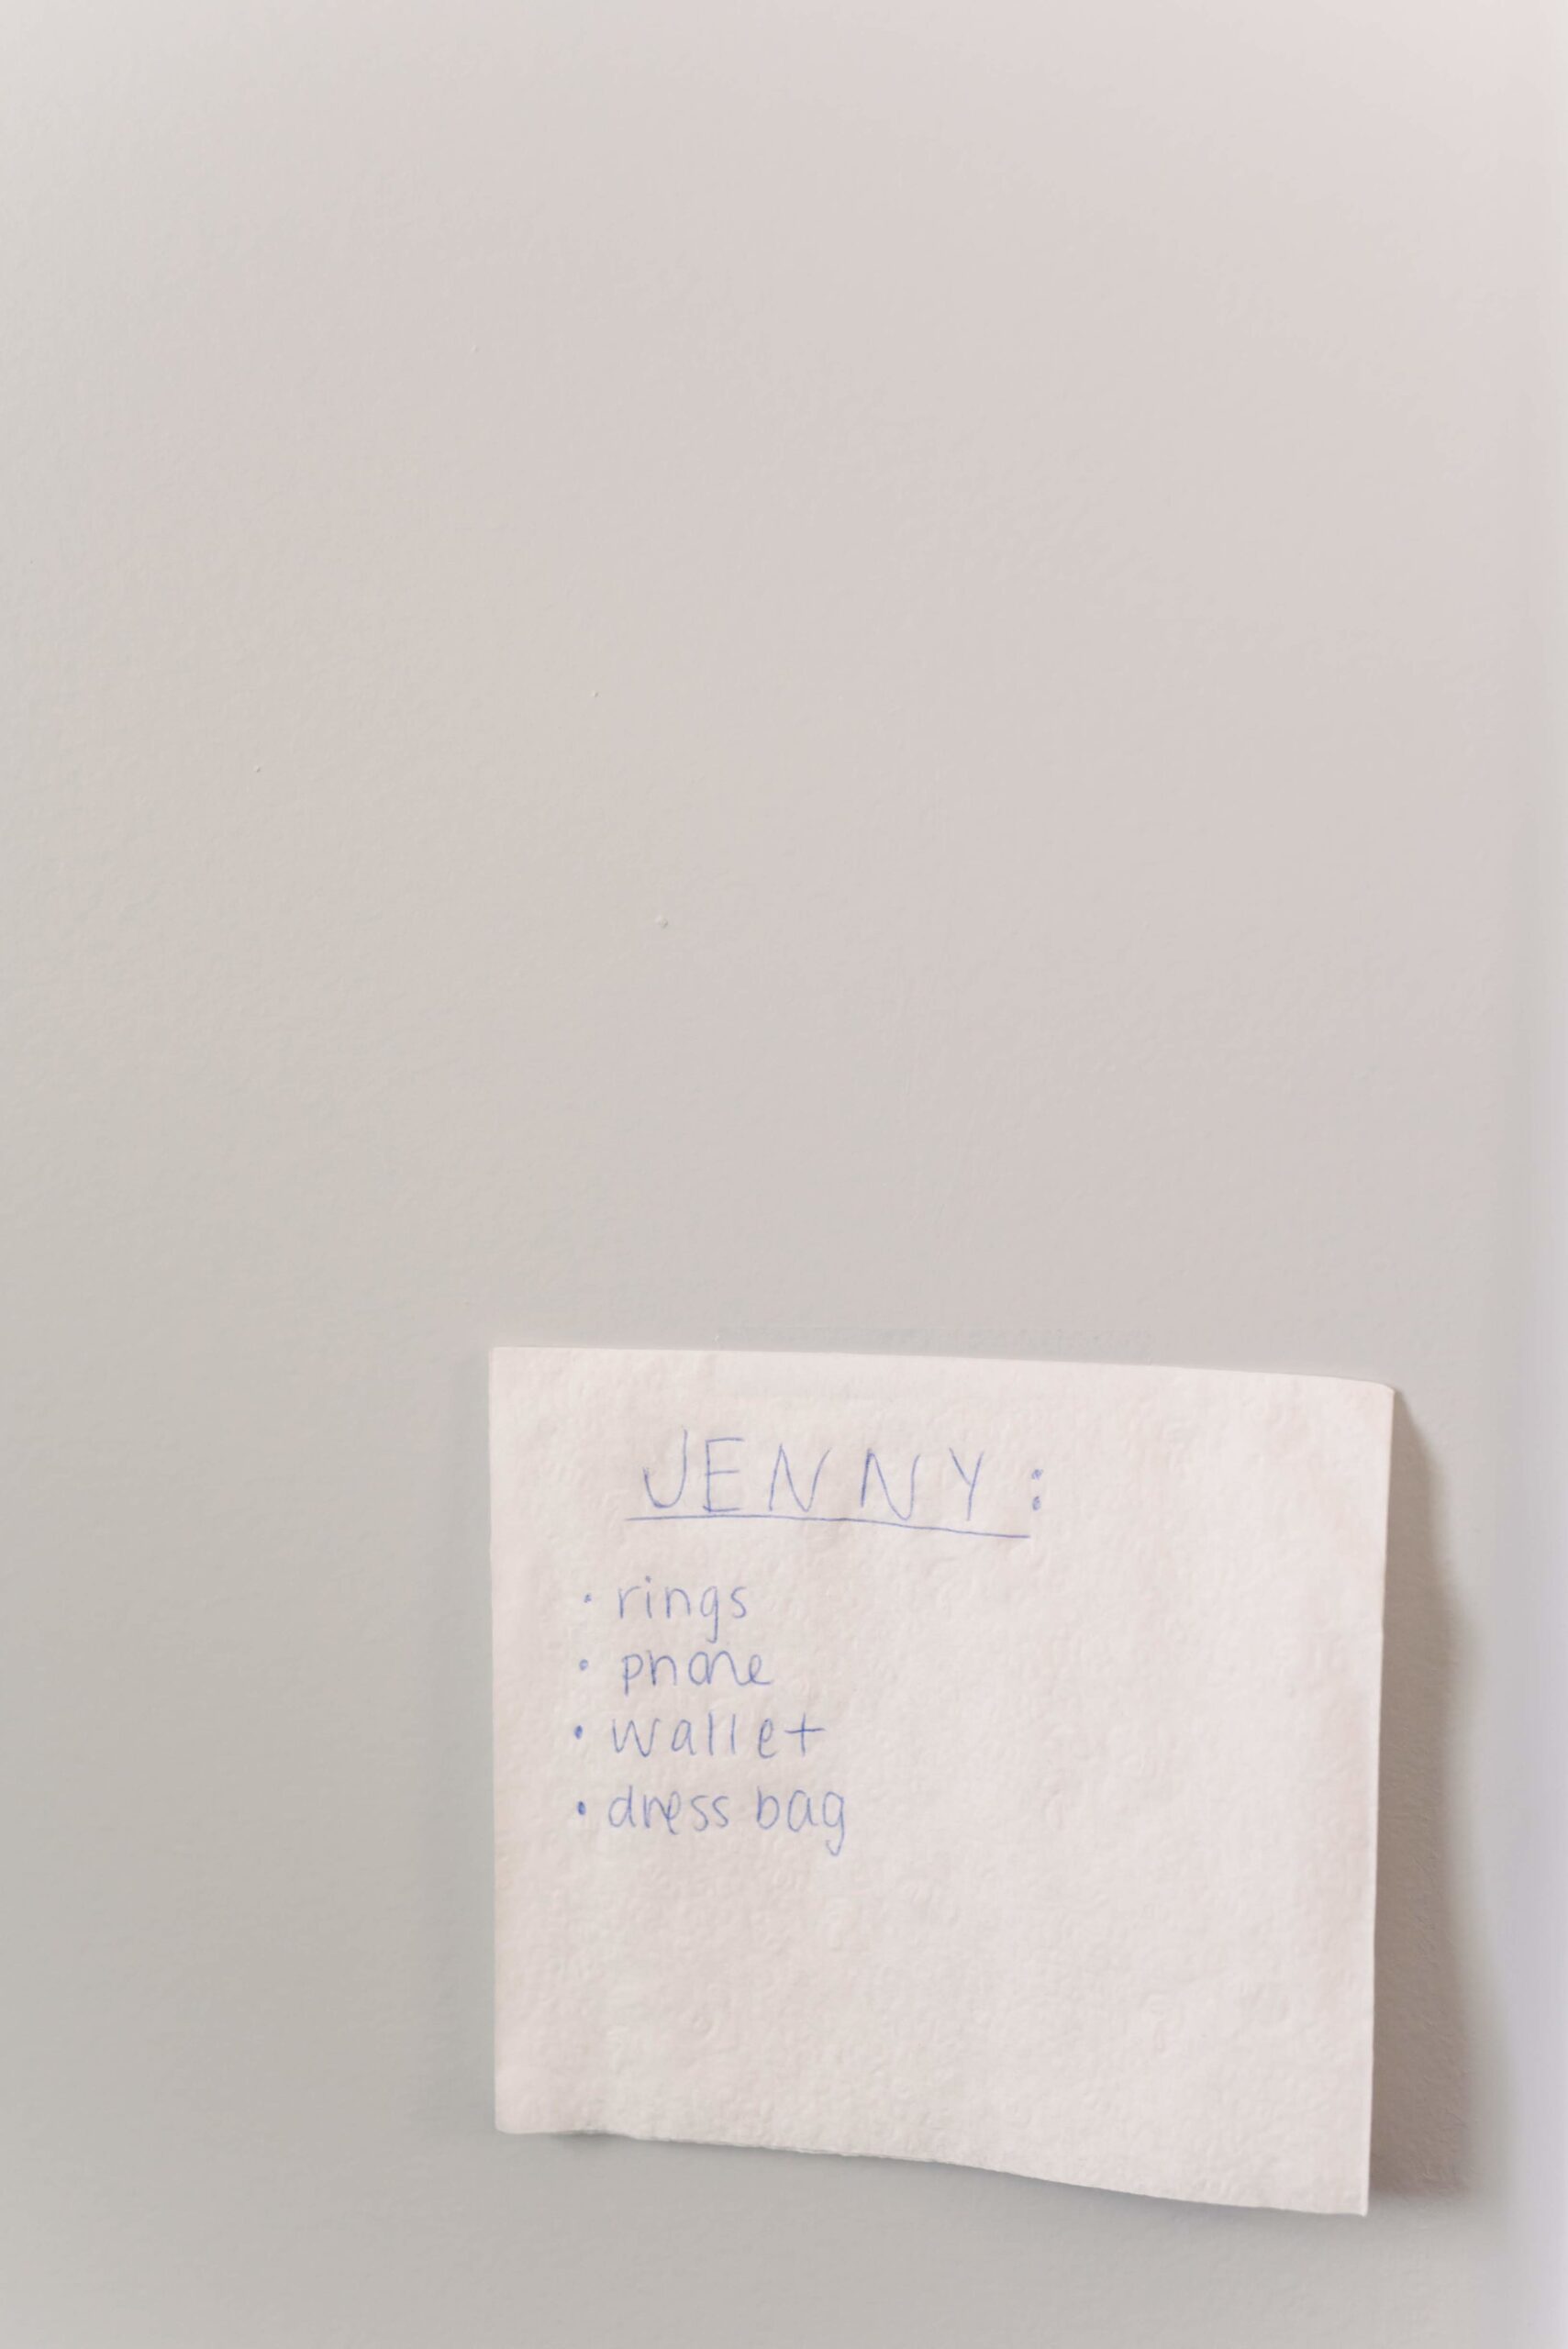 We loved Jenny’s personalized checklist of things to remember before they left the Airbnb.Who knew napkins had so many important uses?!